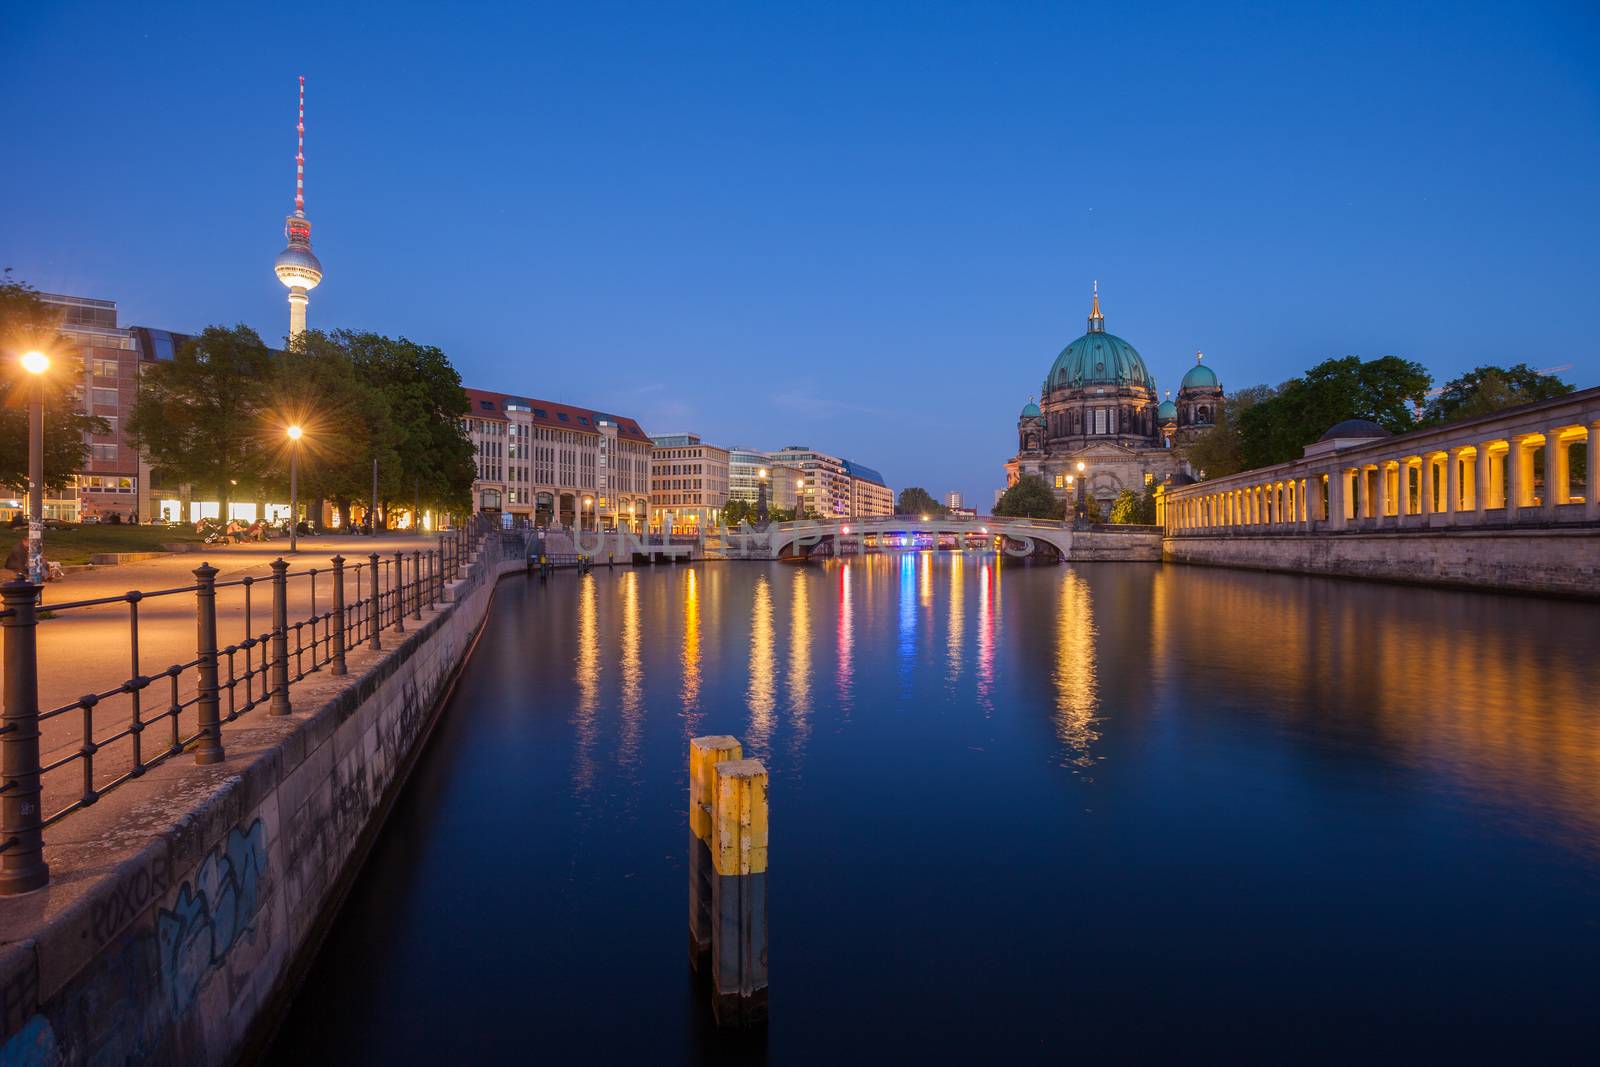 Berlin River Spree, Berliner Dom, and TV Tower by edan